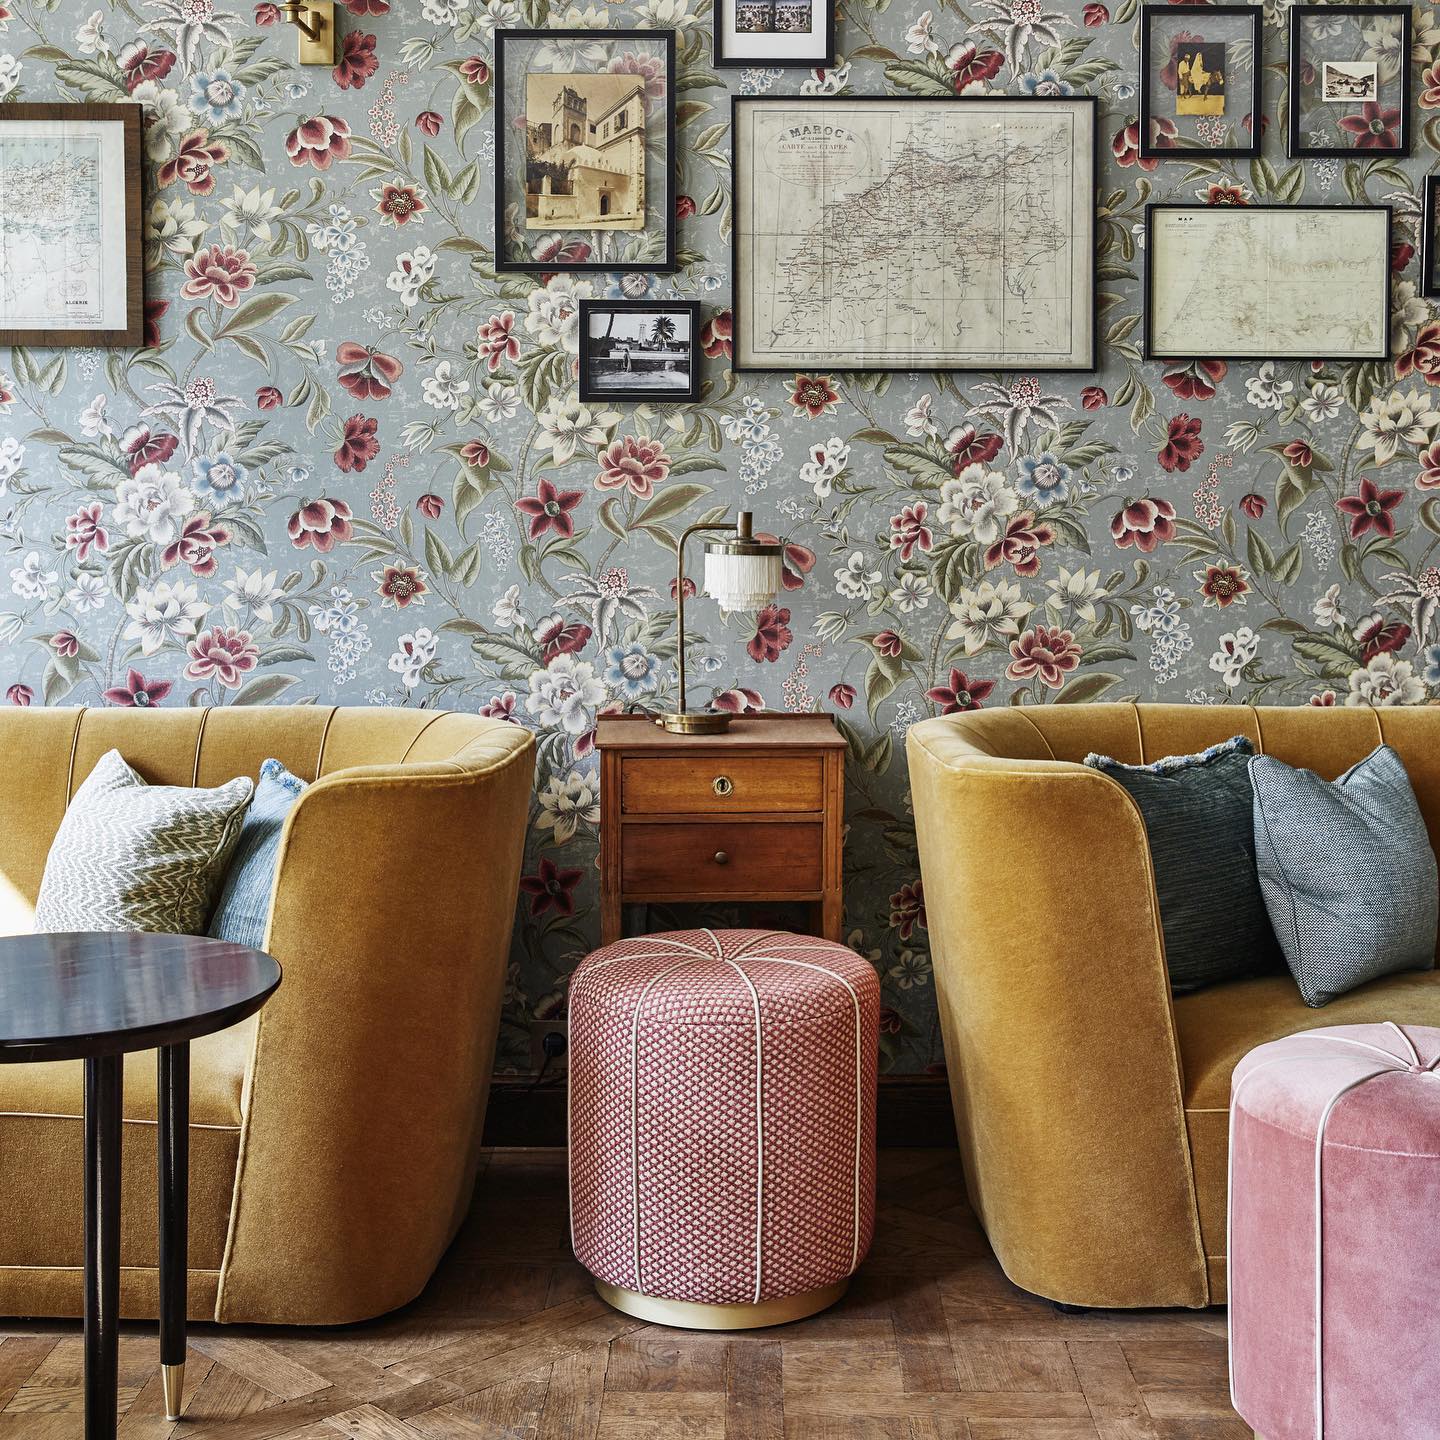 Jacque's Bar at The Hoxton Paris, with Marrakesh's Majorelle garden as the inspiration behind the design. Intricate floral wallpaper and plush lounge furniture fill the room, alongside upholstered poufs and accent cushions. 